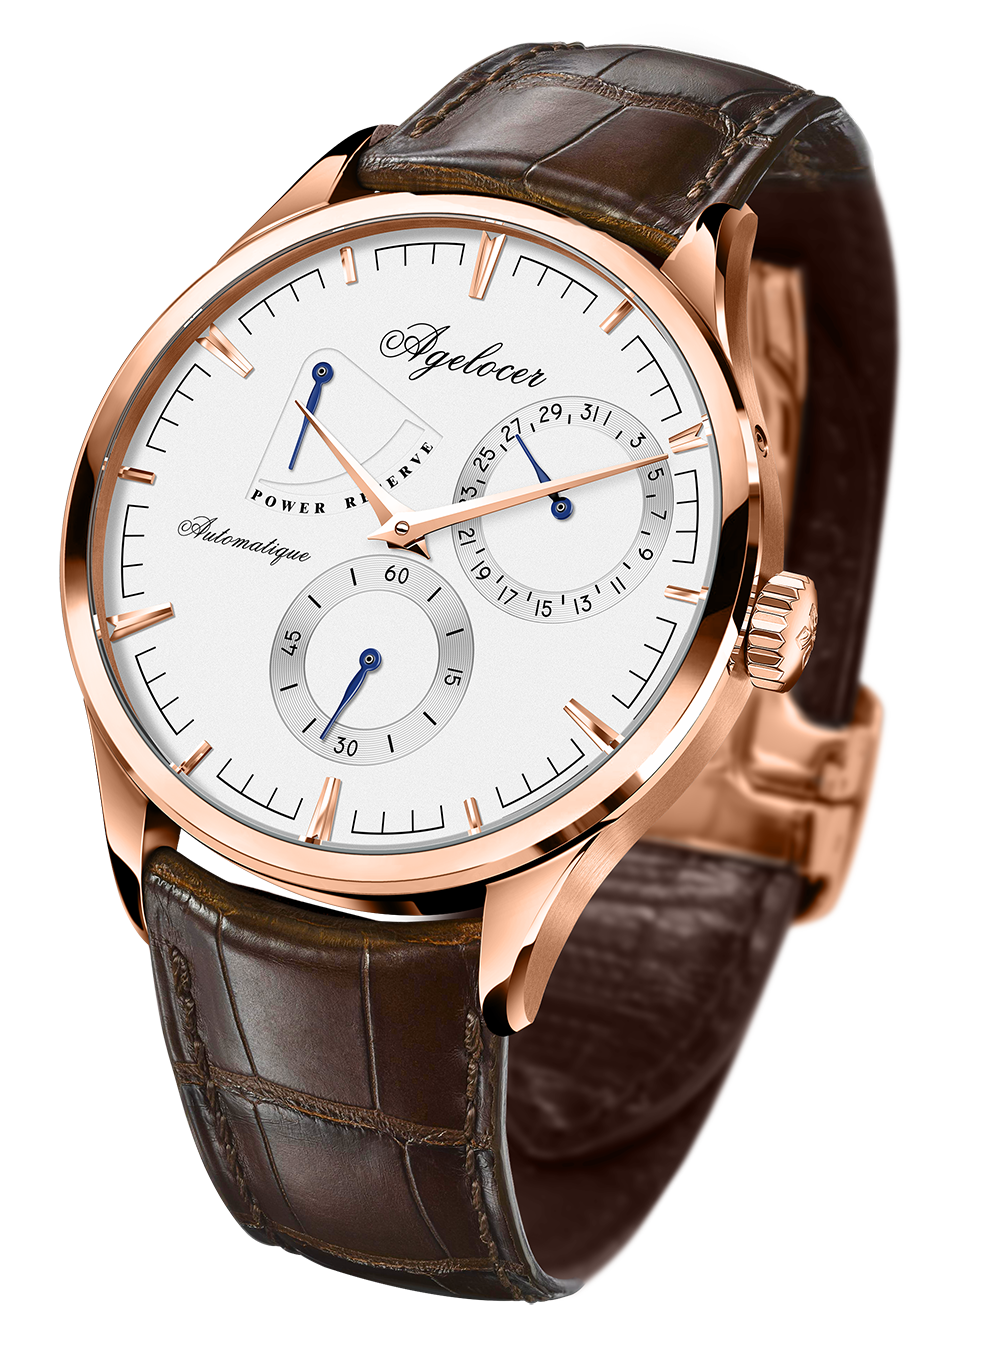 Agelocer Automatic Watch Power Reserve Date Display Budapest Series 410